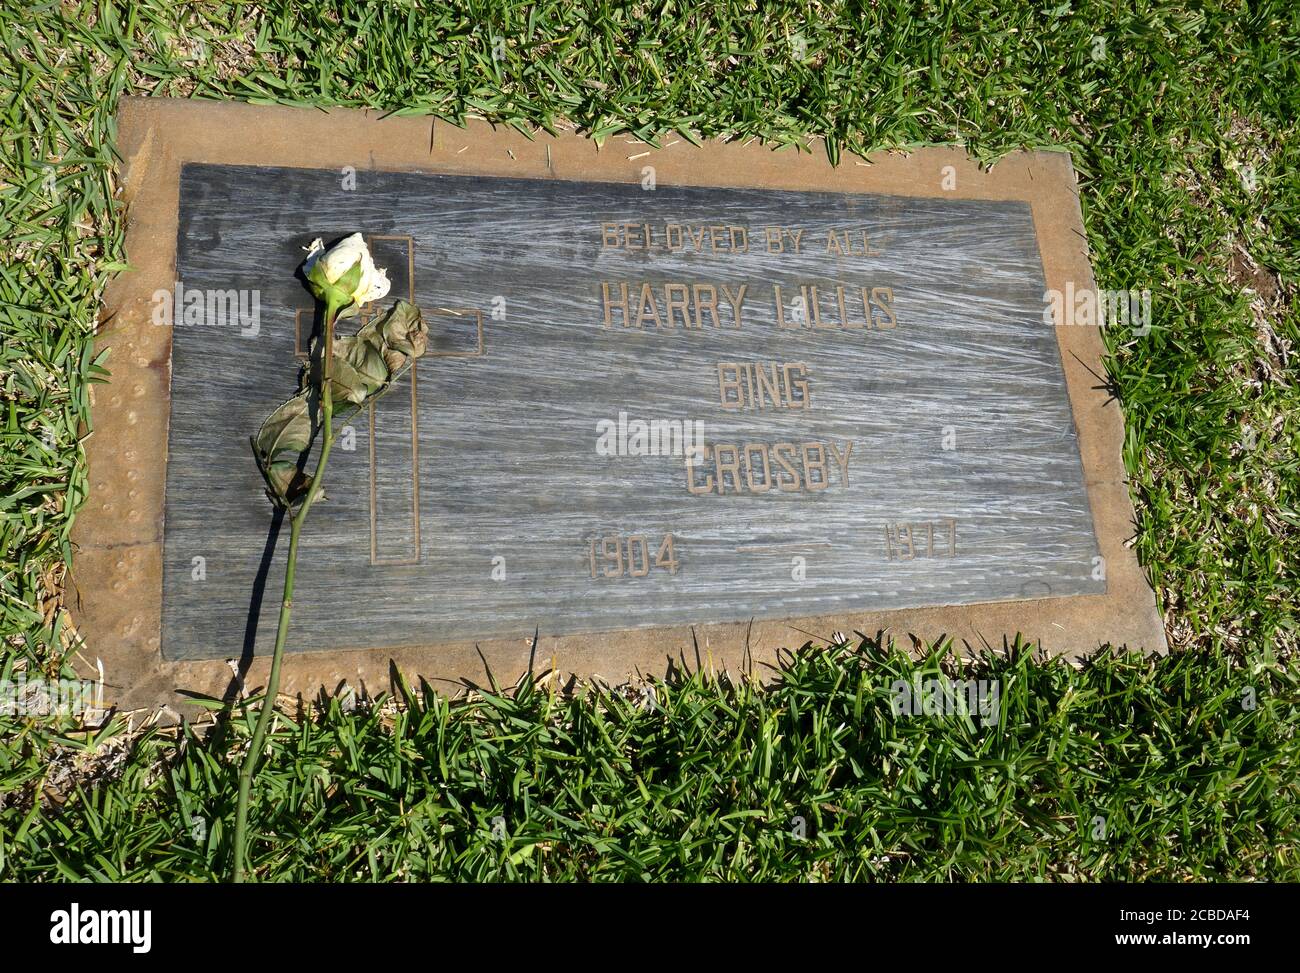 Culver City, California, USA 11th August 2020 A general view of atmosphere of Bing Crosby's Grave in Grotto Section at Holy Cross Cemetery on August 11, 2020 in Culver City, California, USA. Photo by Barry King/Alamy Stock Photo Stock Photo